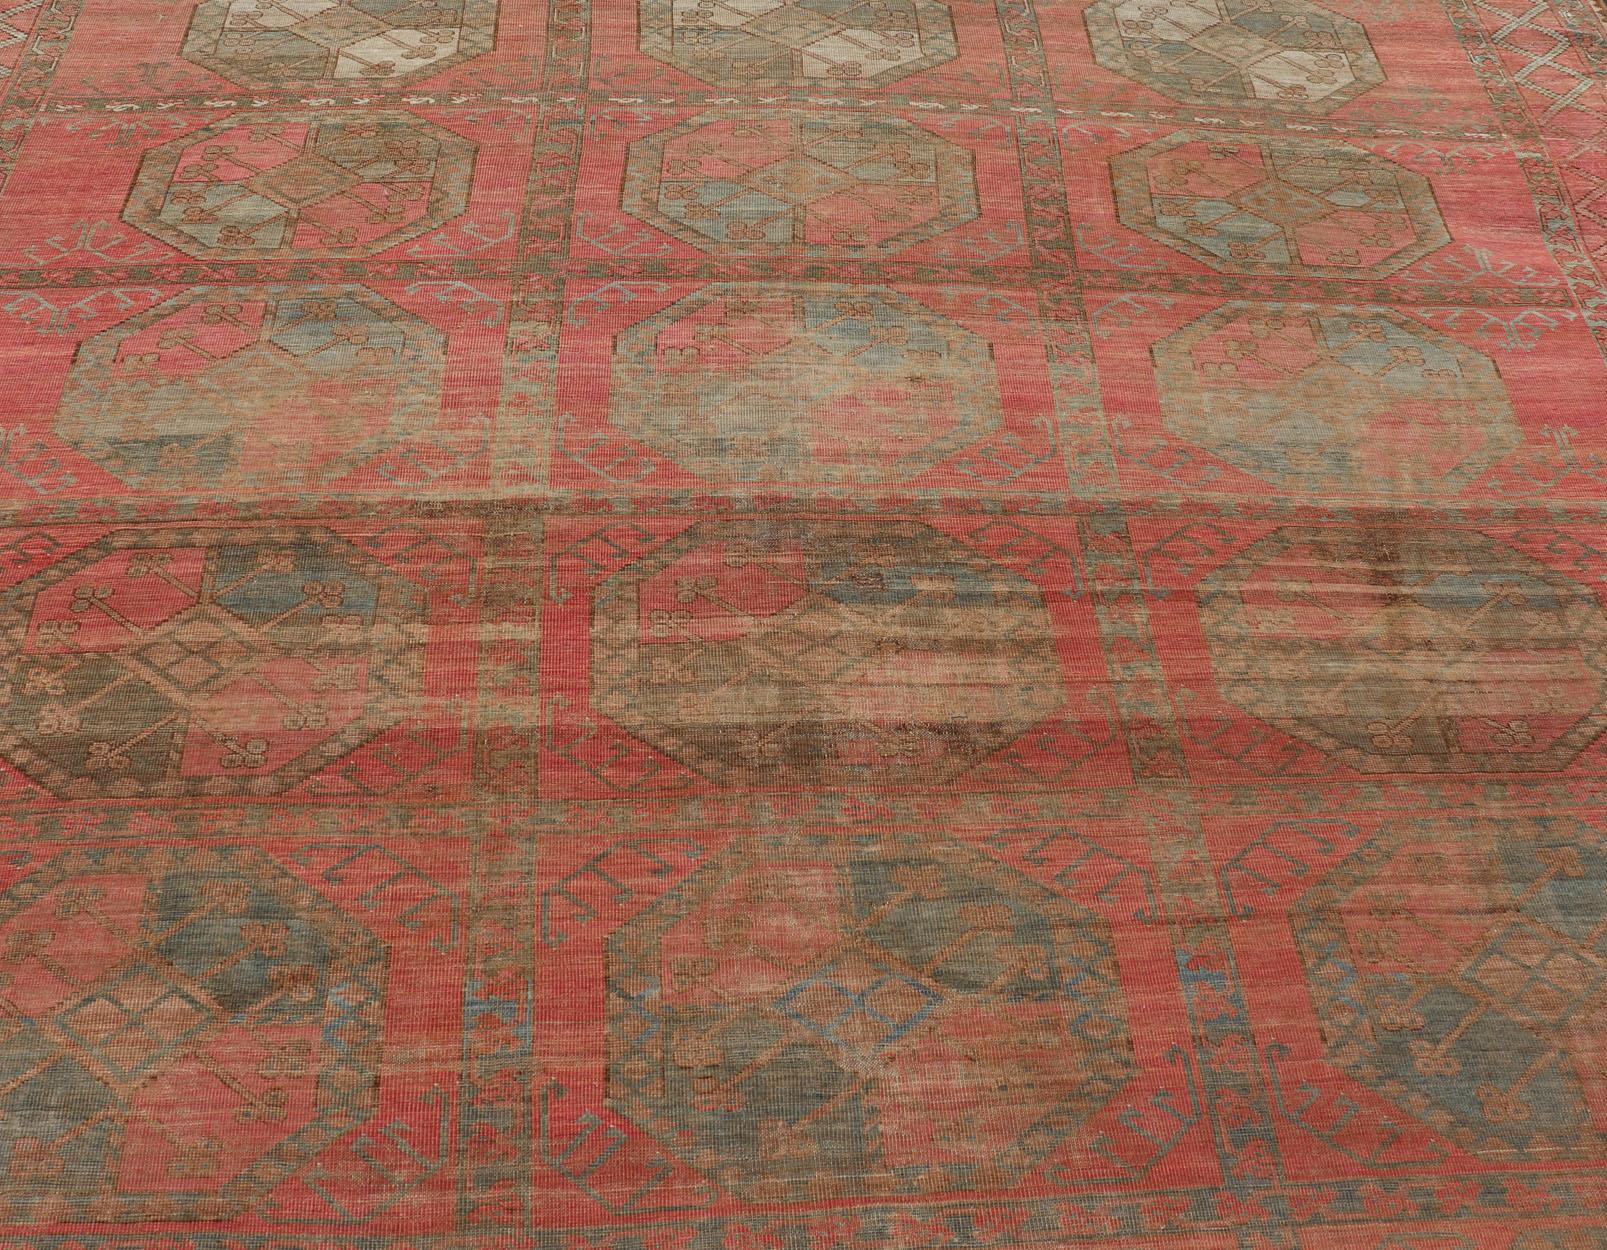 Wool Large Turkomen Ersari Rug with All-Over Gul Design in Tan, Coral, and Brown For Sale